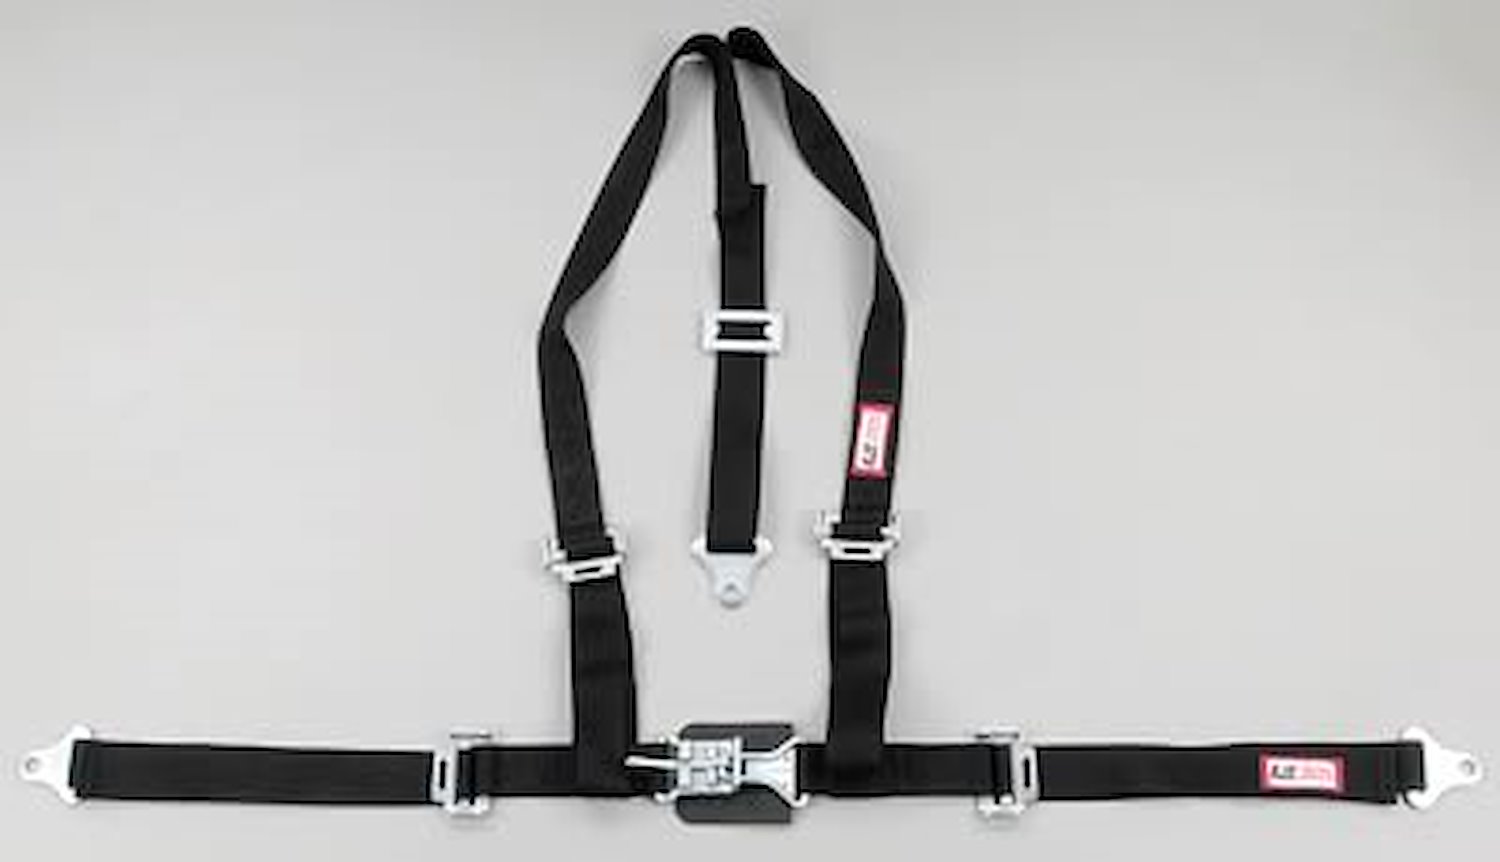 NON-SFI L&L HARNESS 2 PULL UP Lap Belt BOLT SEWN IN 2 S.H. Y FLOOR Mount WRAP/BOLT BLUE